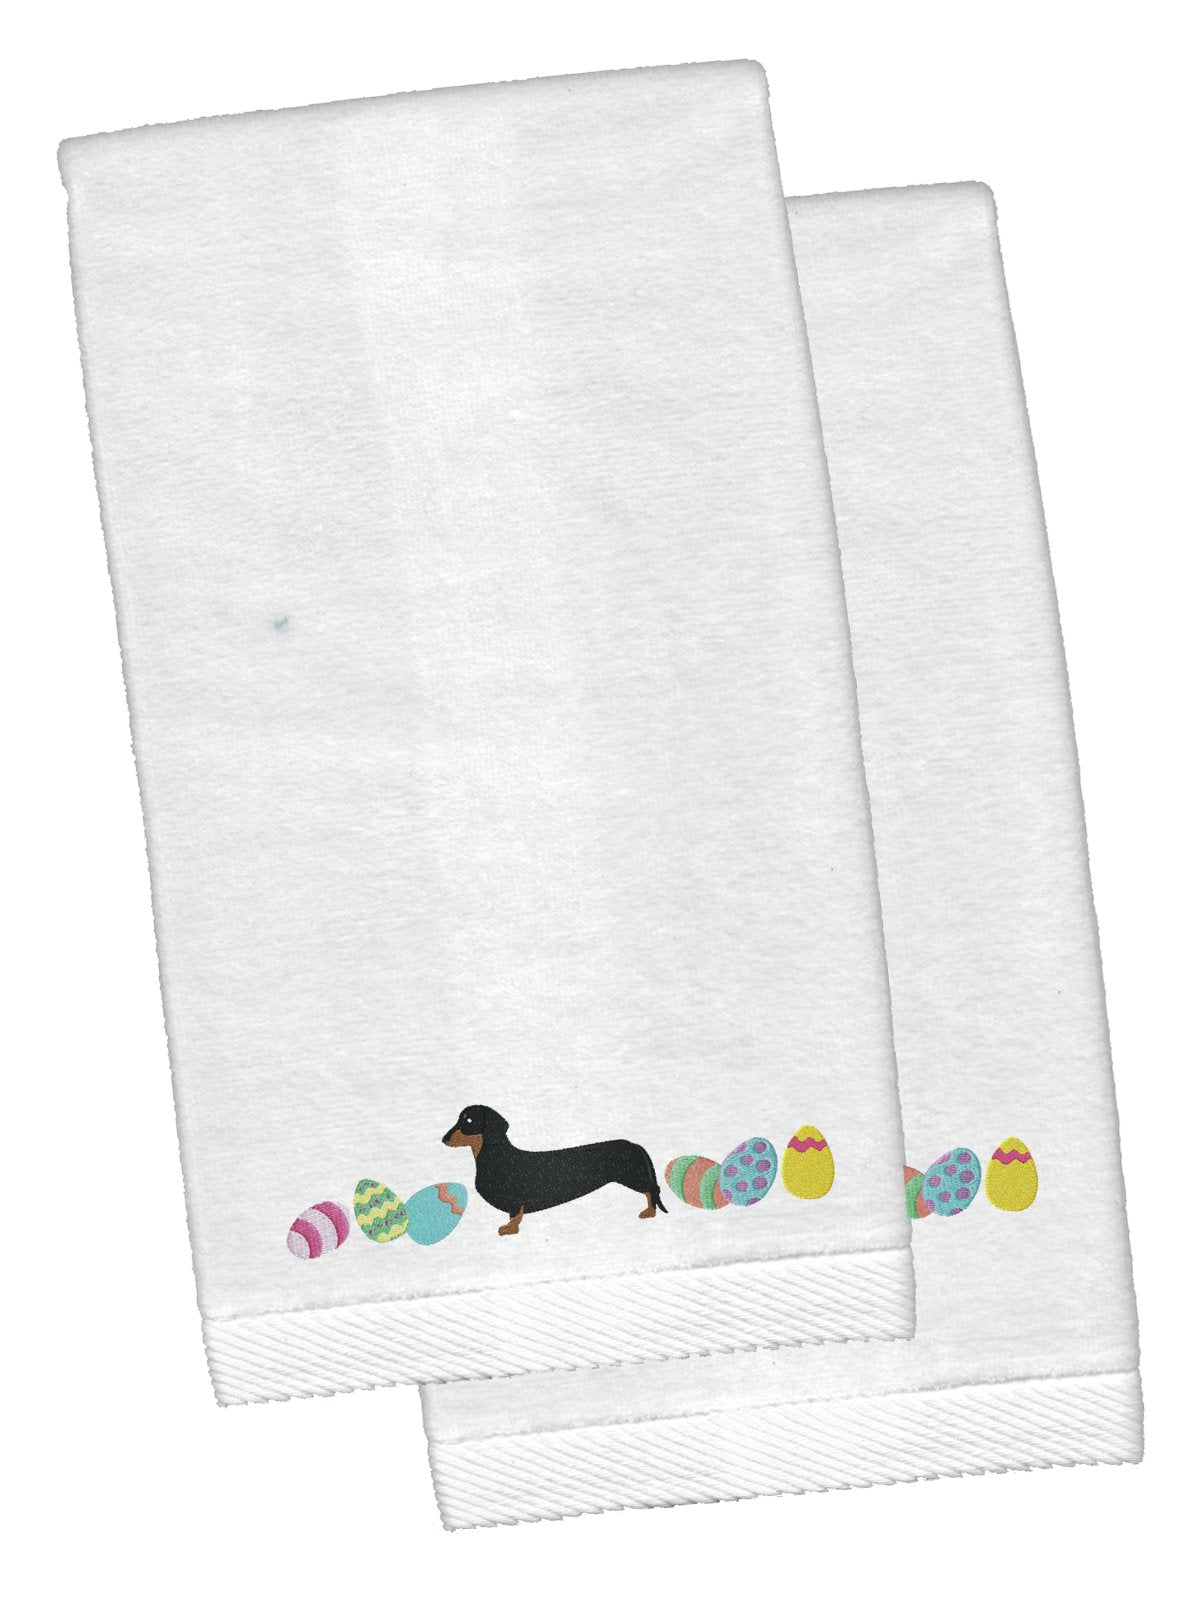 Dachshund Easter White Embroidered Plush Hand Towel Set of 2 CK1631KTEMB by Caroline's Treasures